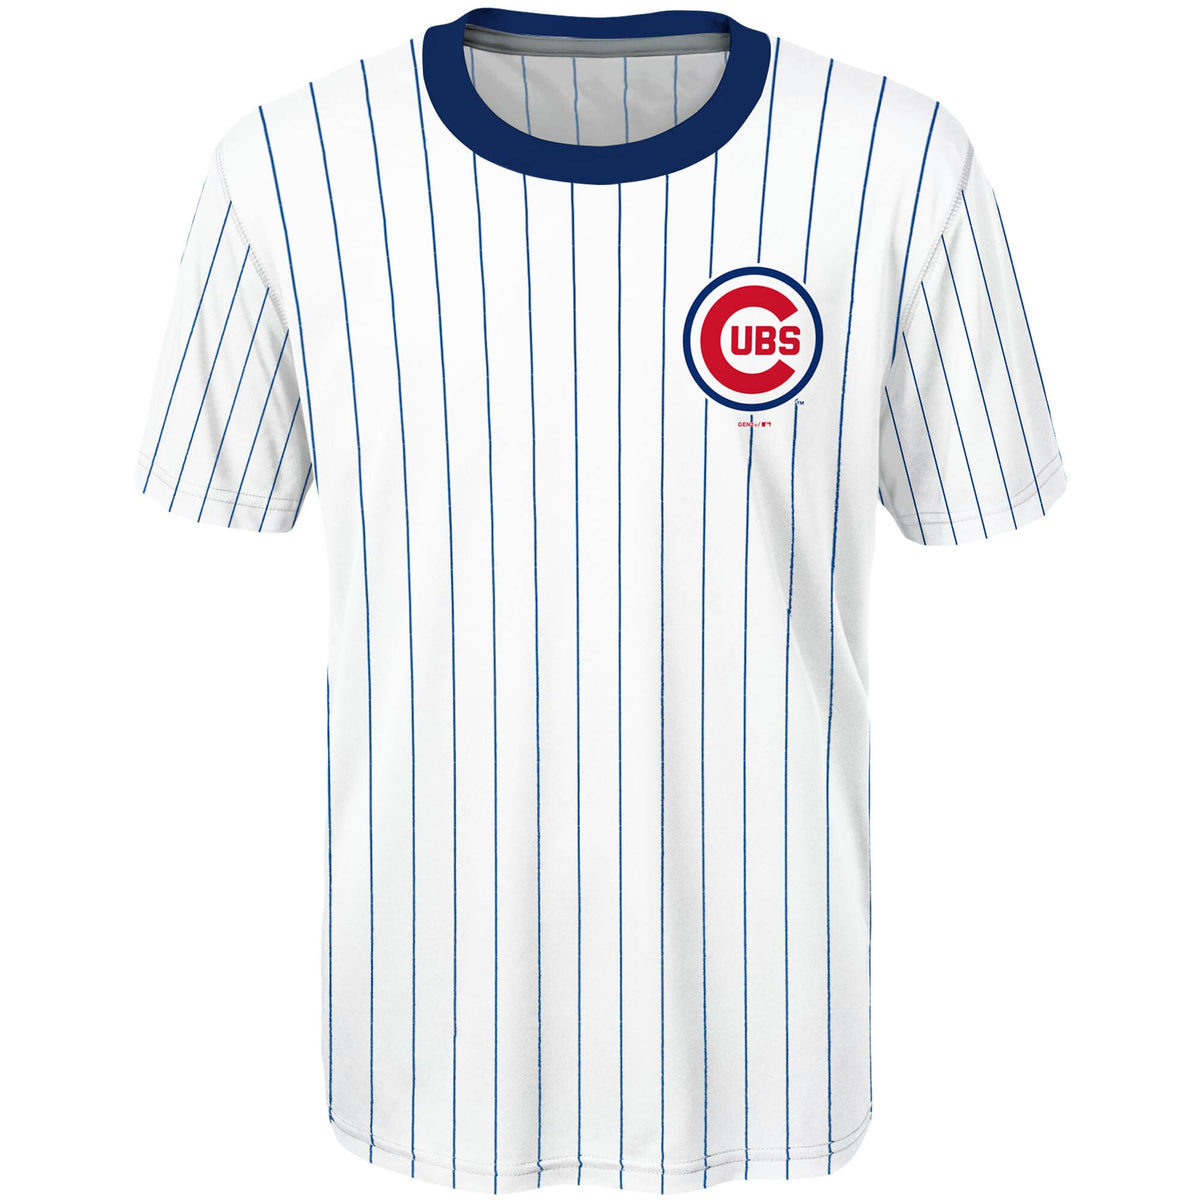 Cooperstown CHICAGO CUBS Blue Red Throwback V-Neck Baseball Jersey - Size  LARGE